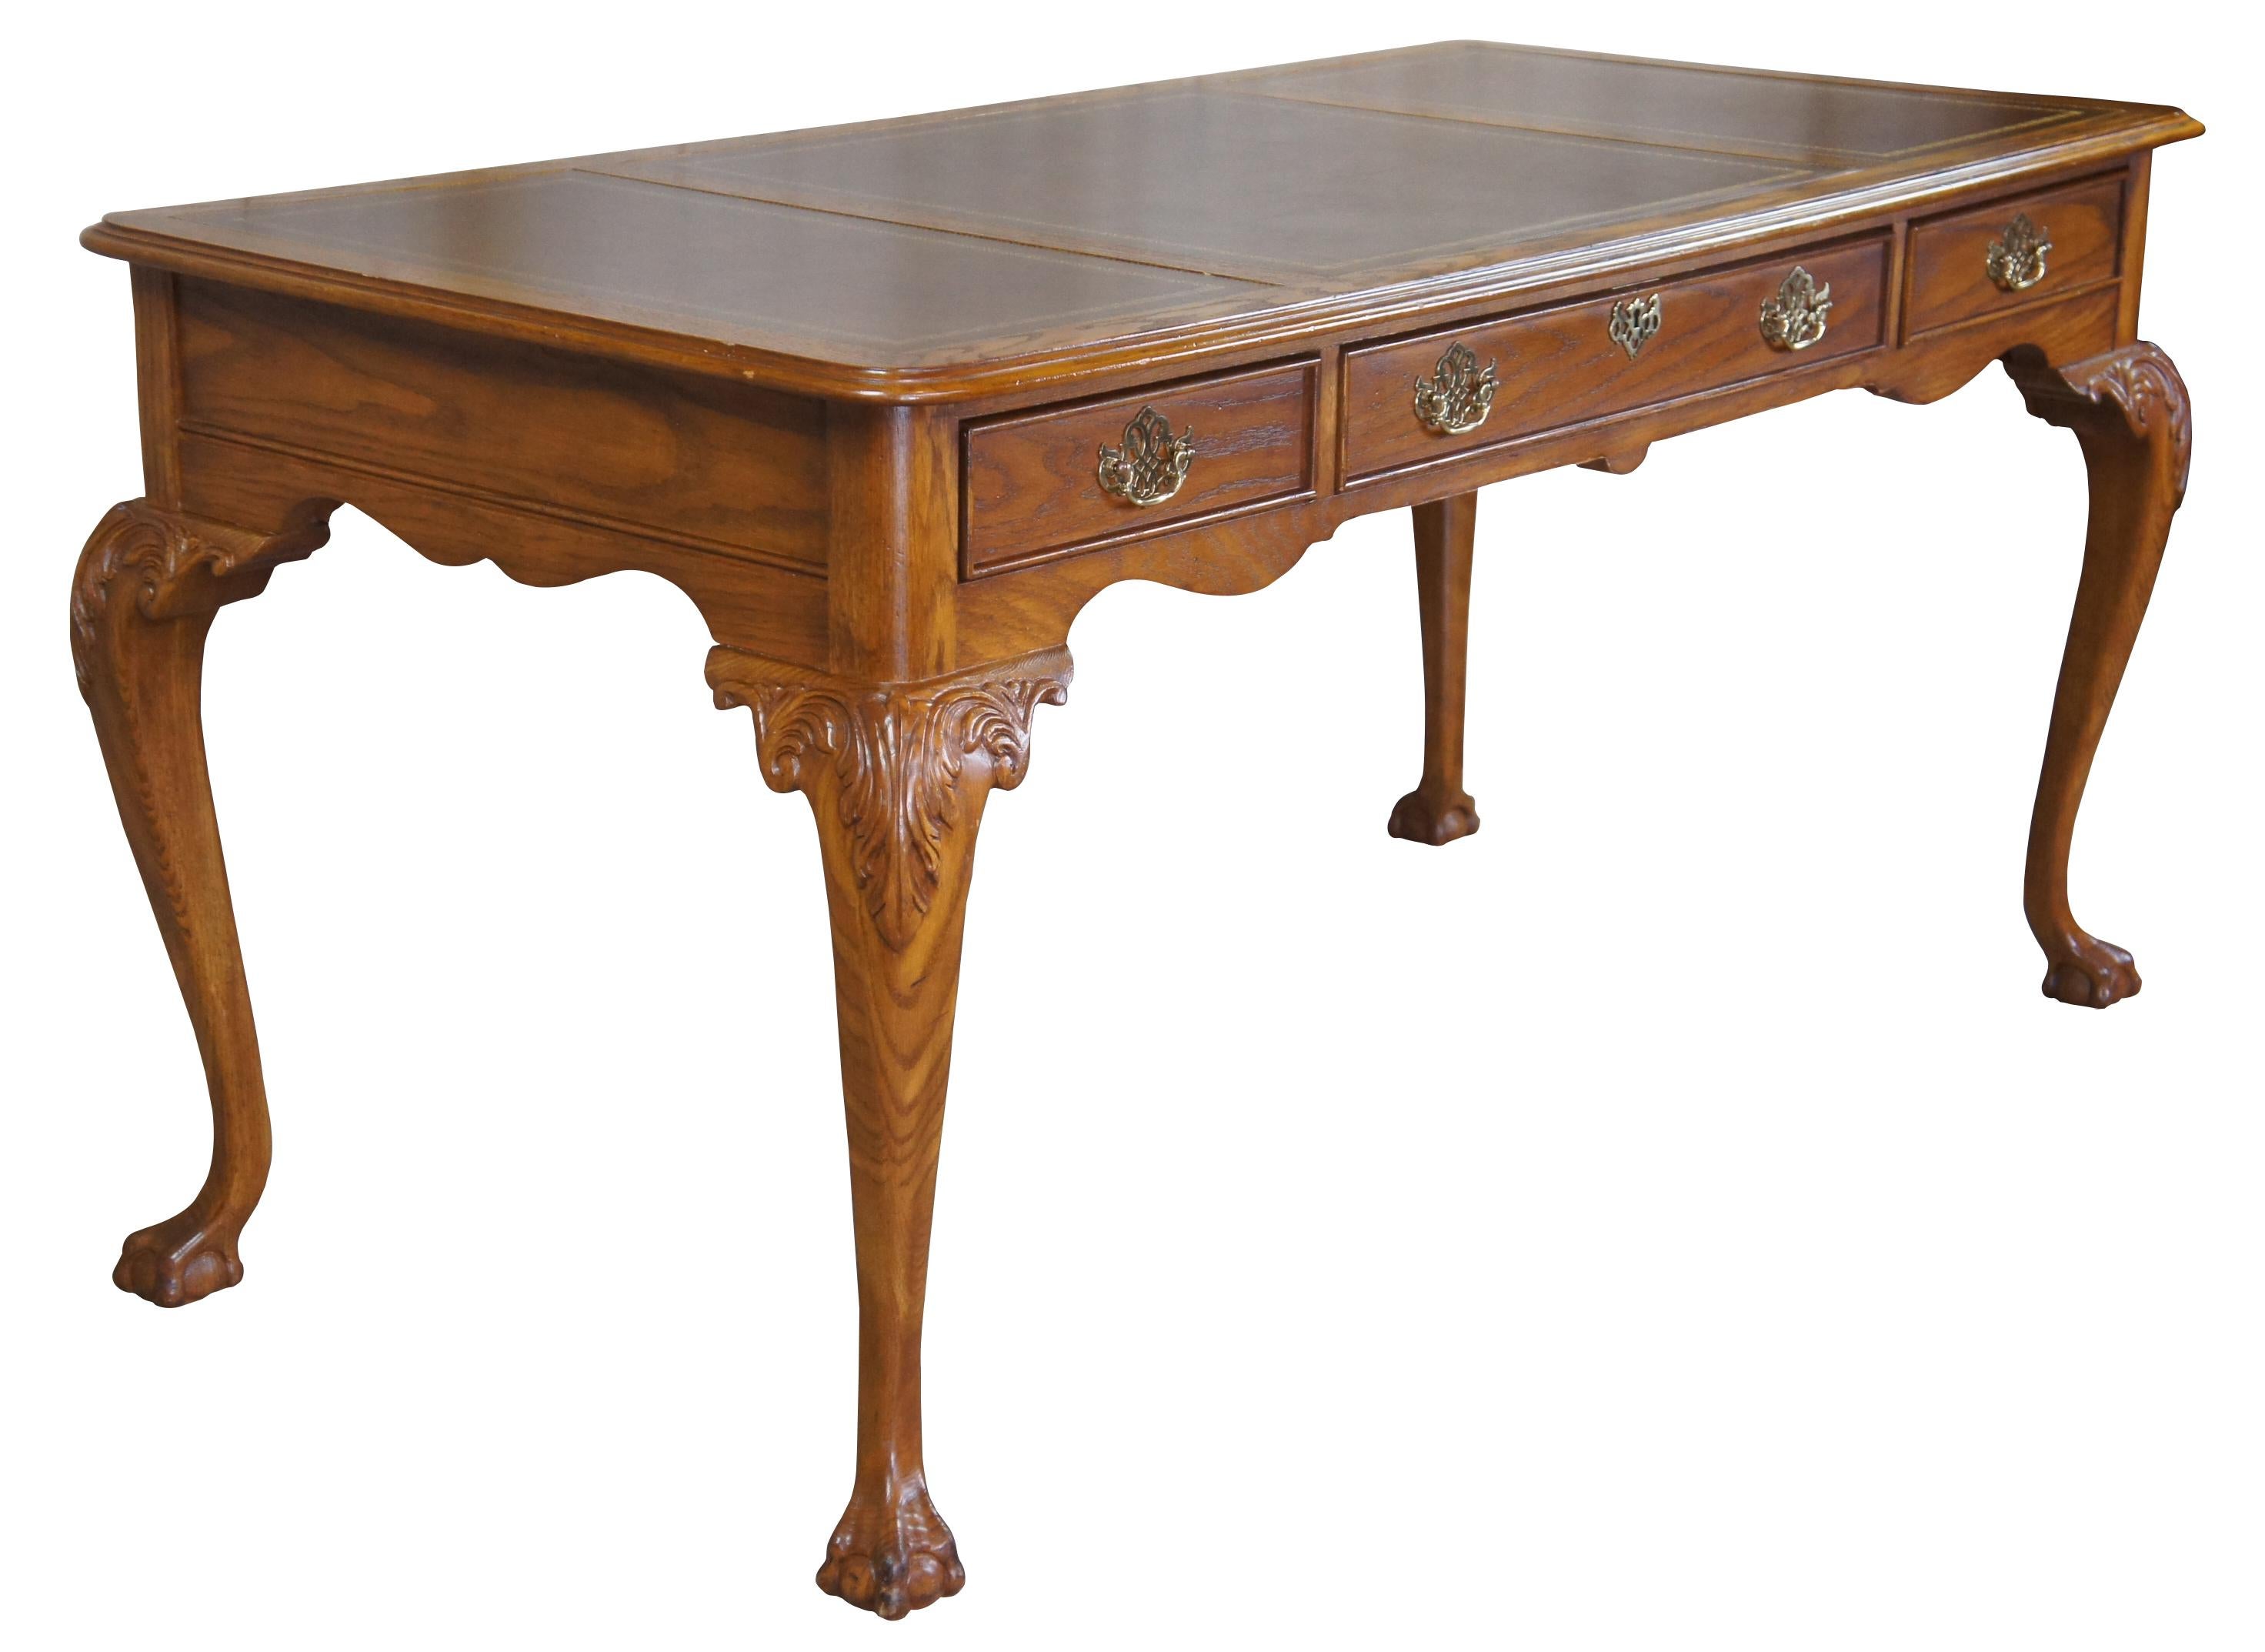 Vintage Sligh Furniture Queen Anne writing desk. Made of oak featuring tooled leather top, three drawers and scrolled legs leading to ball and claw feet. Measure: 60